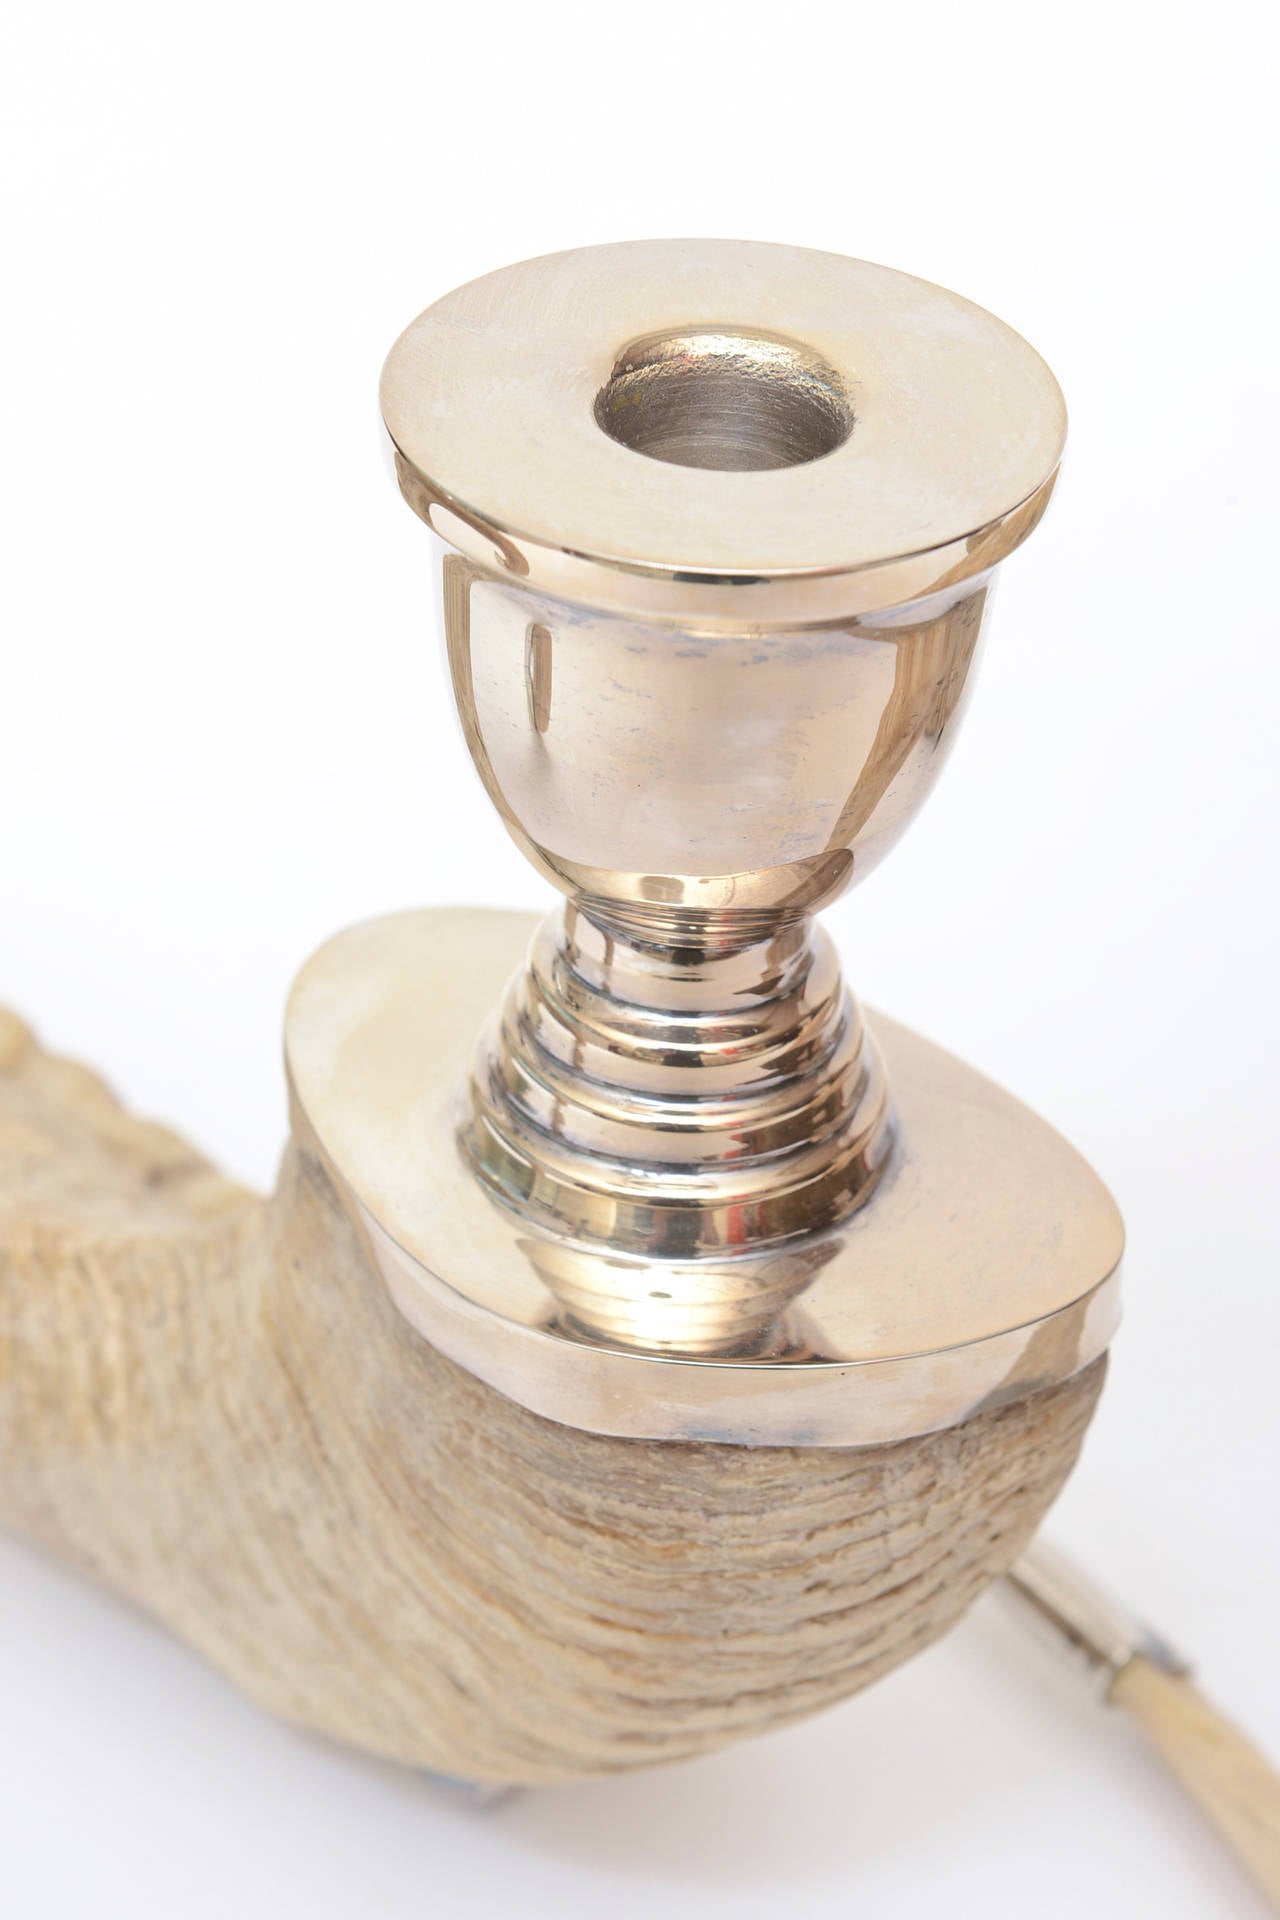 These sculptural, organic and twisted ram's horn candlesticks have silver plate ball feet and silver plate tips.
Their configurations can be in multiple forms. They can be intertwined or be turned many different ways to form many different